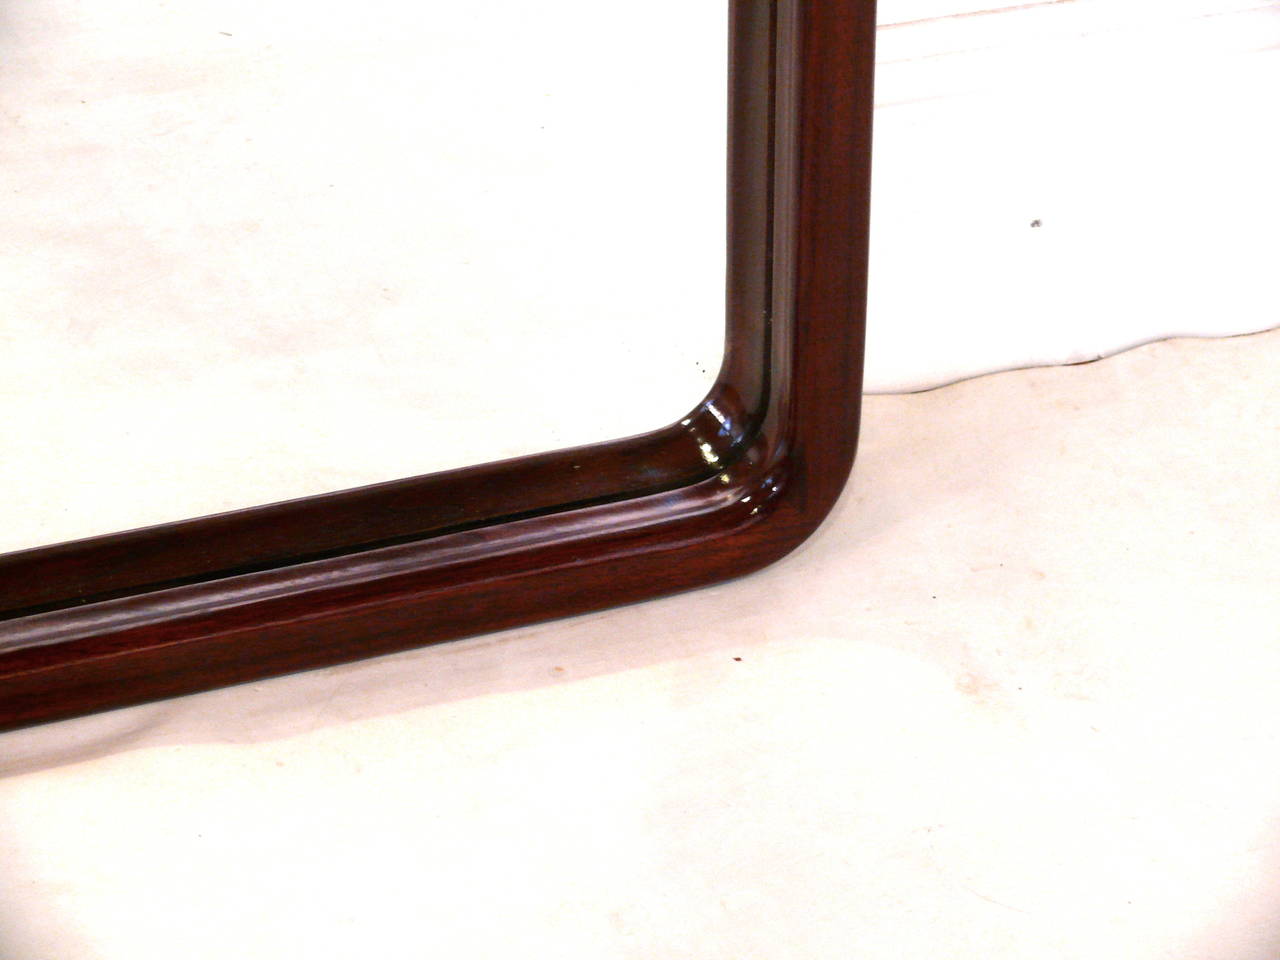 Large walnut mirror newly refinished, with a high gloss sheen. It could be hung both vertical and horizontal. It's in excellent condition.